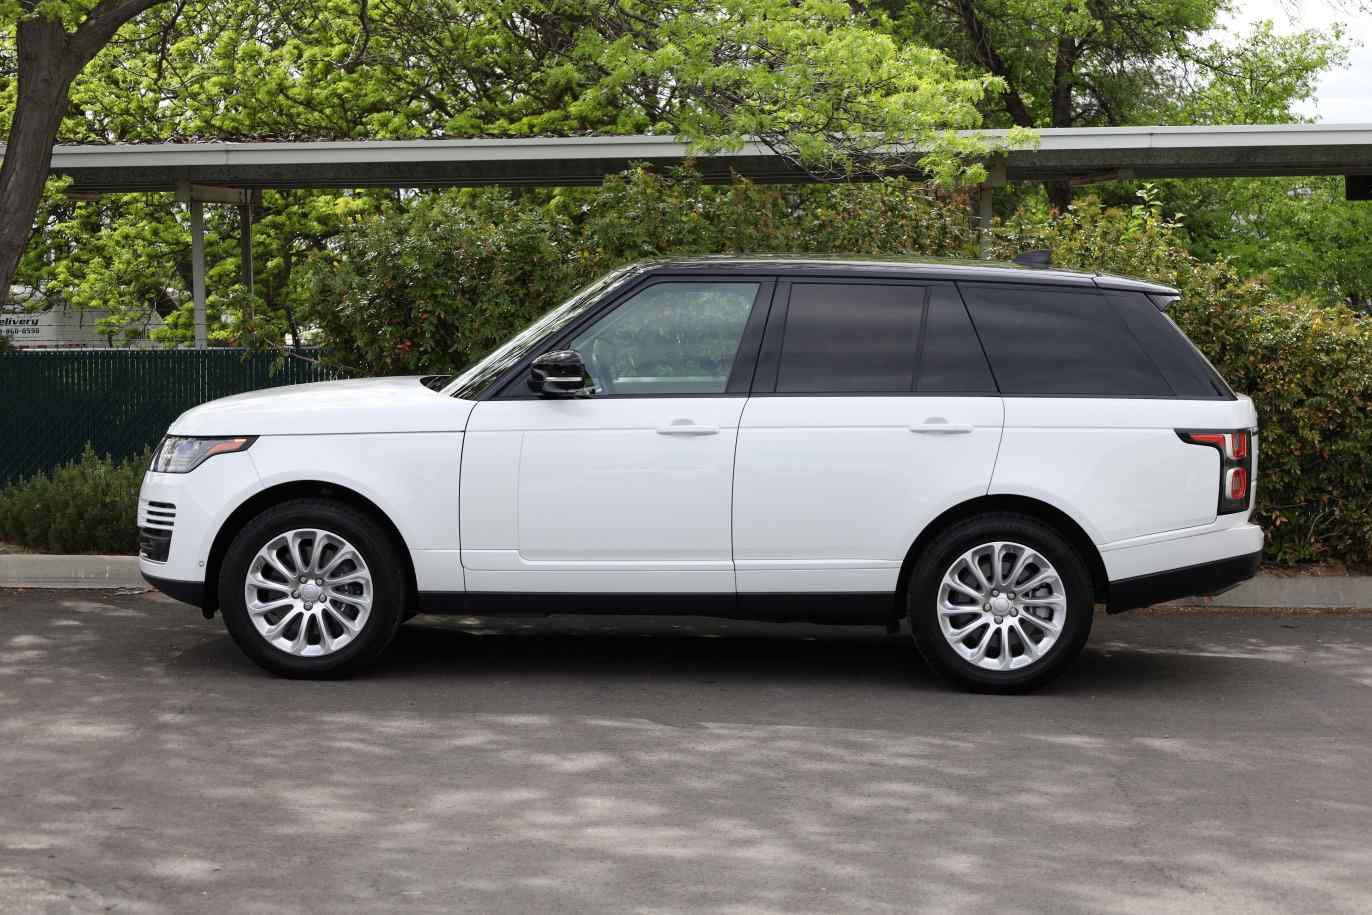 2018-land-rover-range-rover-hse-supercharged-for-sale-02